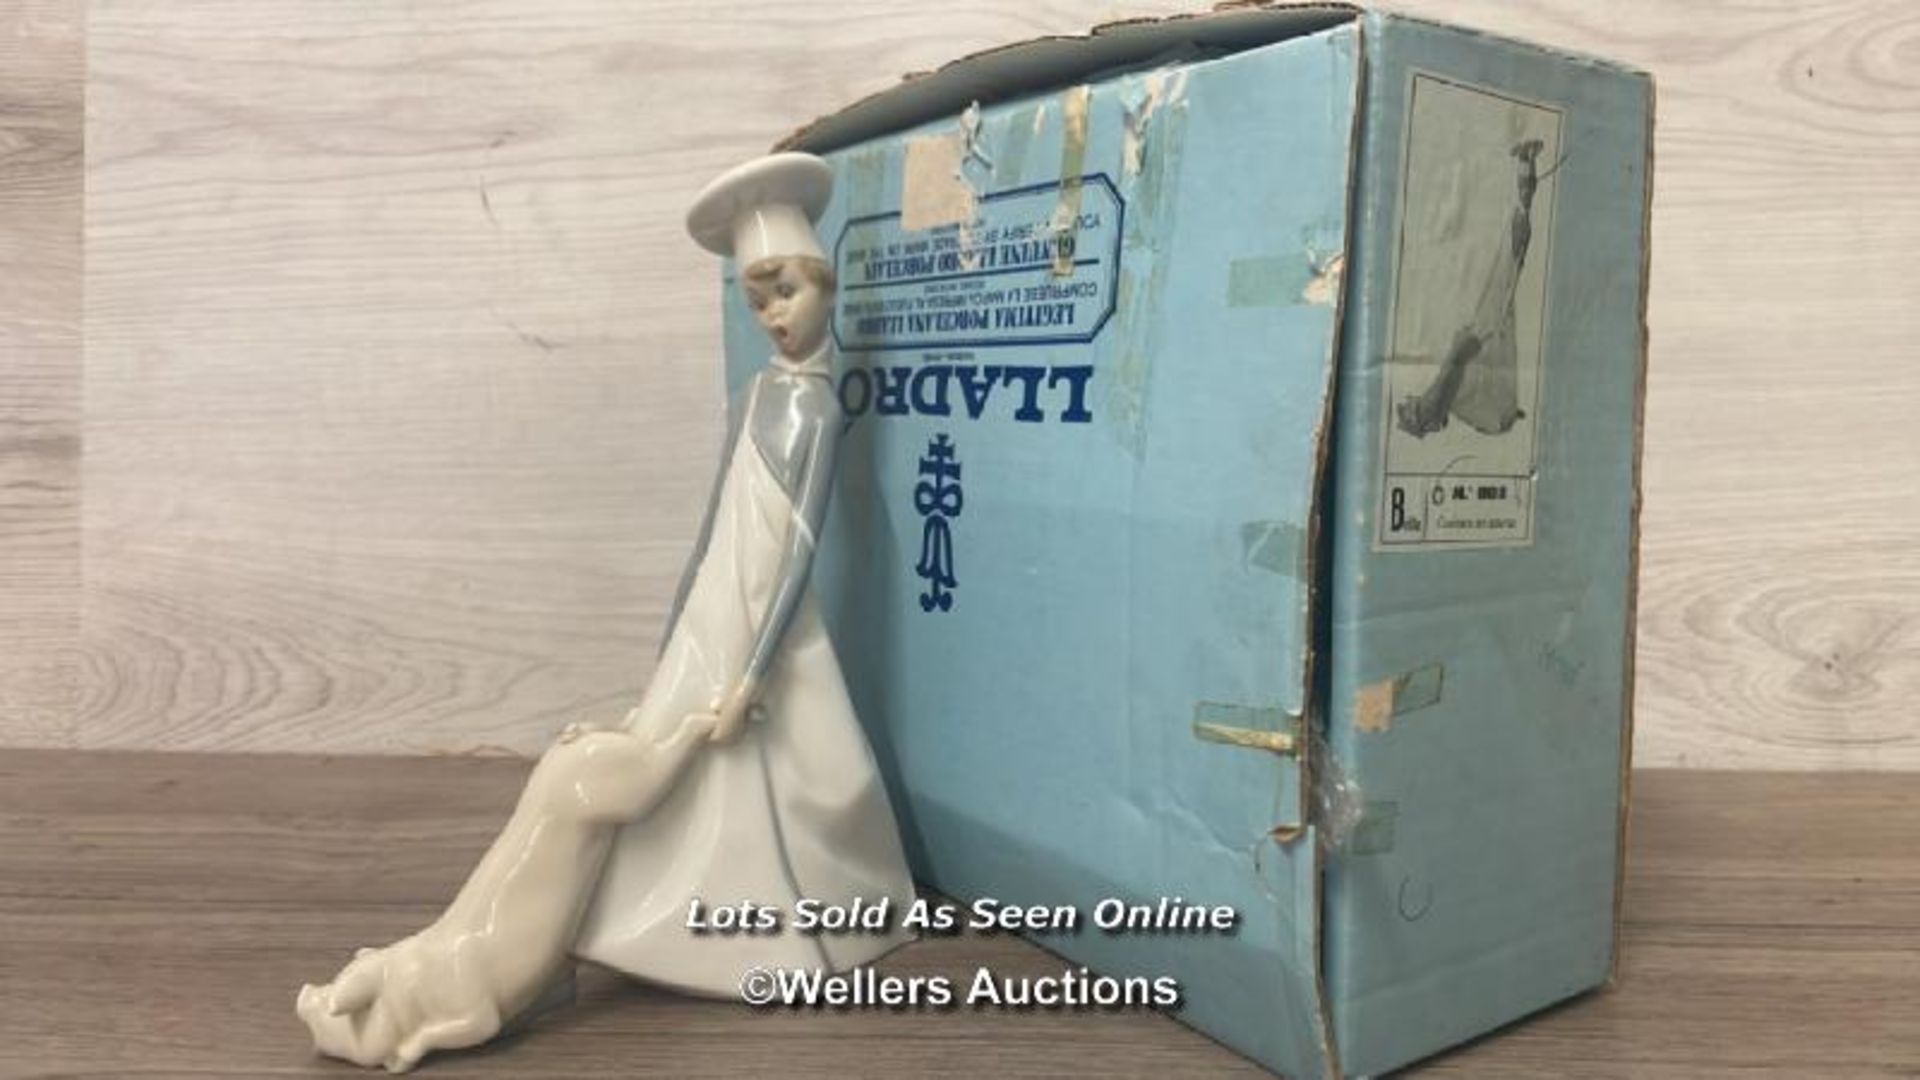 LLADRO - BRILLO FIGURE NO. 01004608 "COOK IN TROUBLE" , 25CM HIGH, OVERALL GOOD CONDITION, BOXED - Image 7 of 7